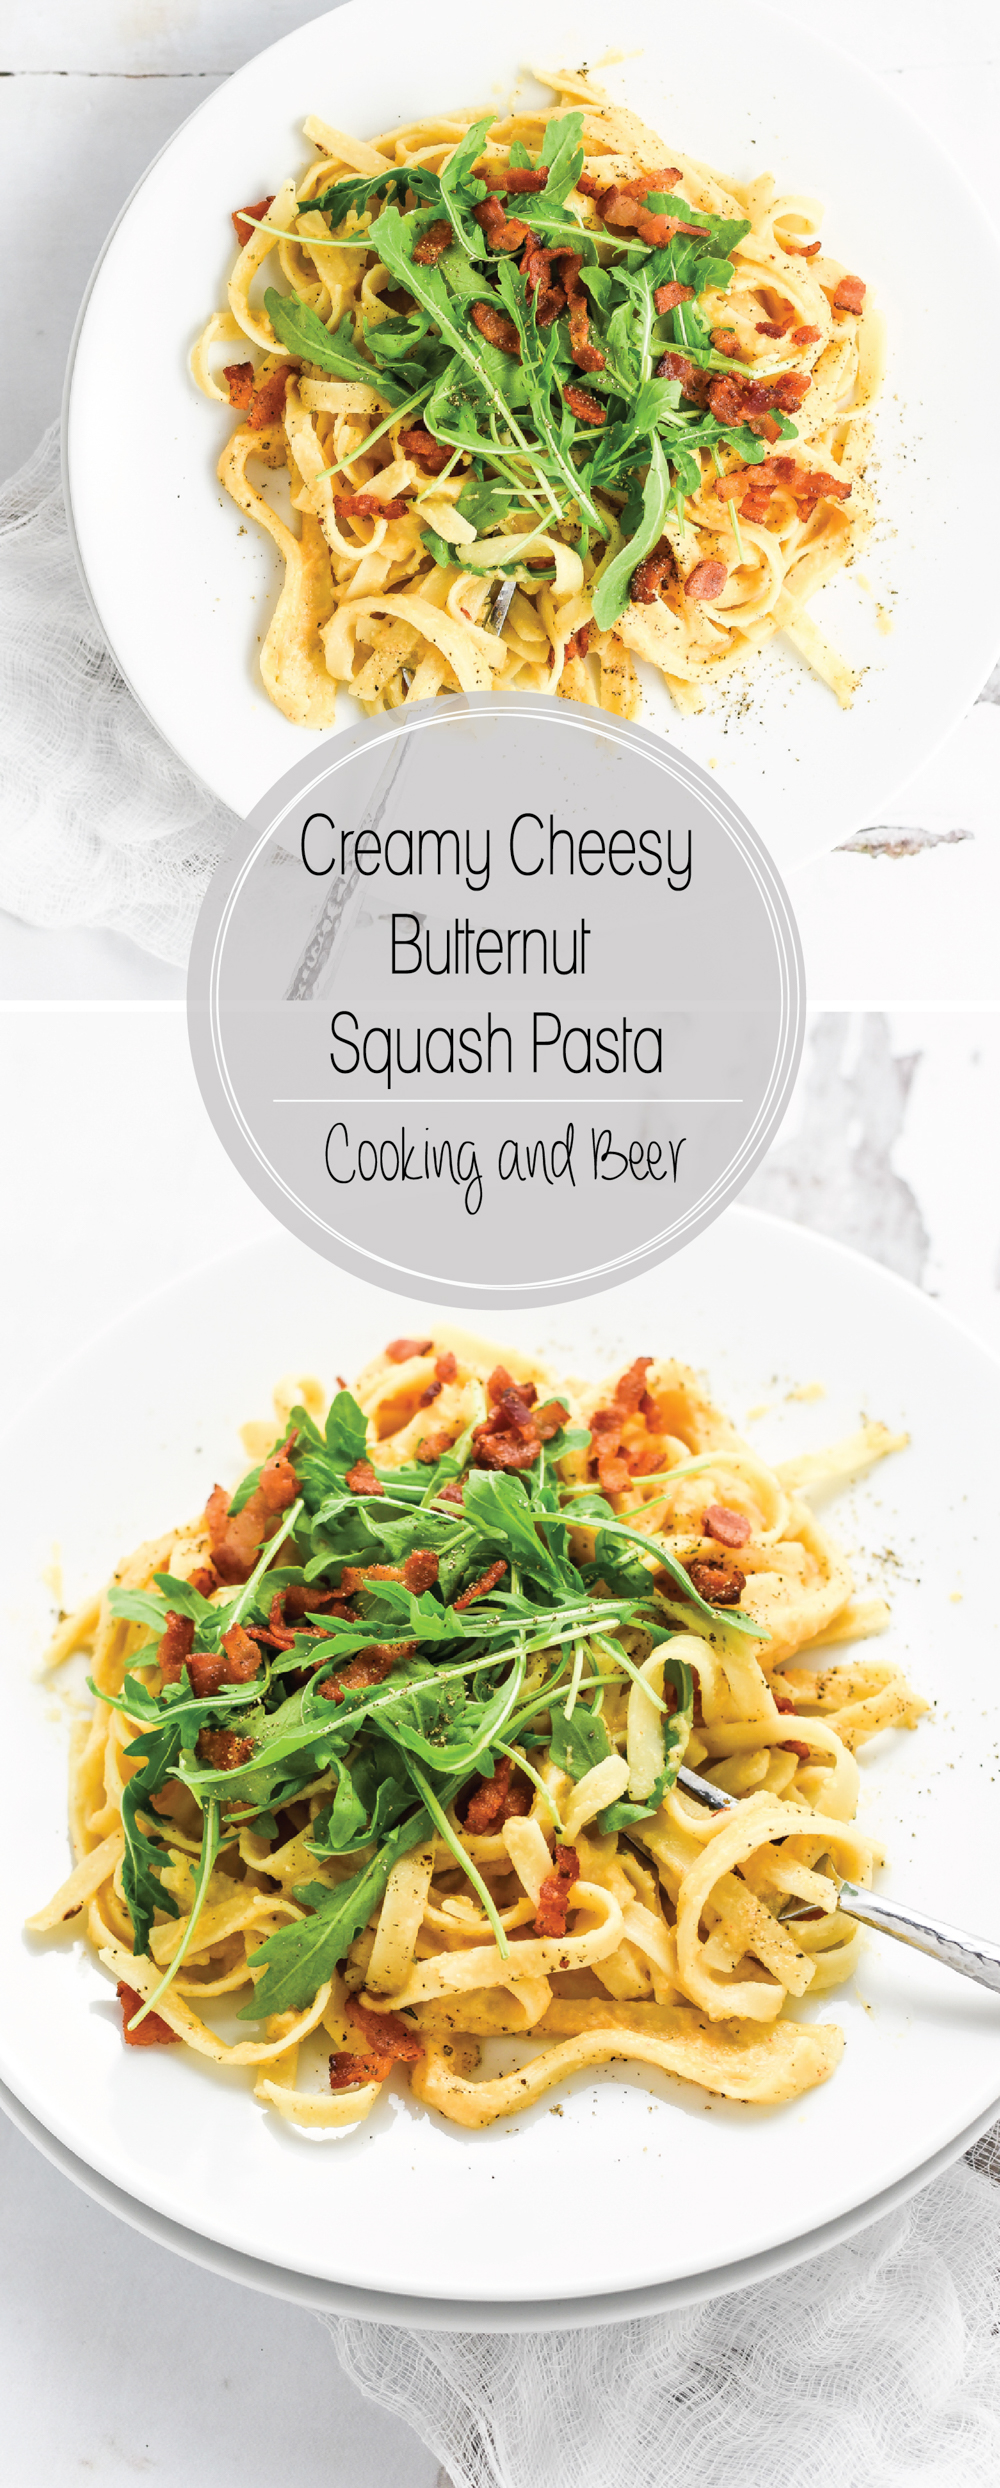 Creamy Cheesy Butternut Squash Pasta is the perfect fall family-friendly weeknight meal that highlights the subtle flavors of butternut squash!